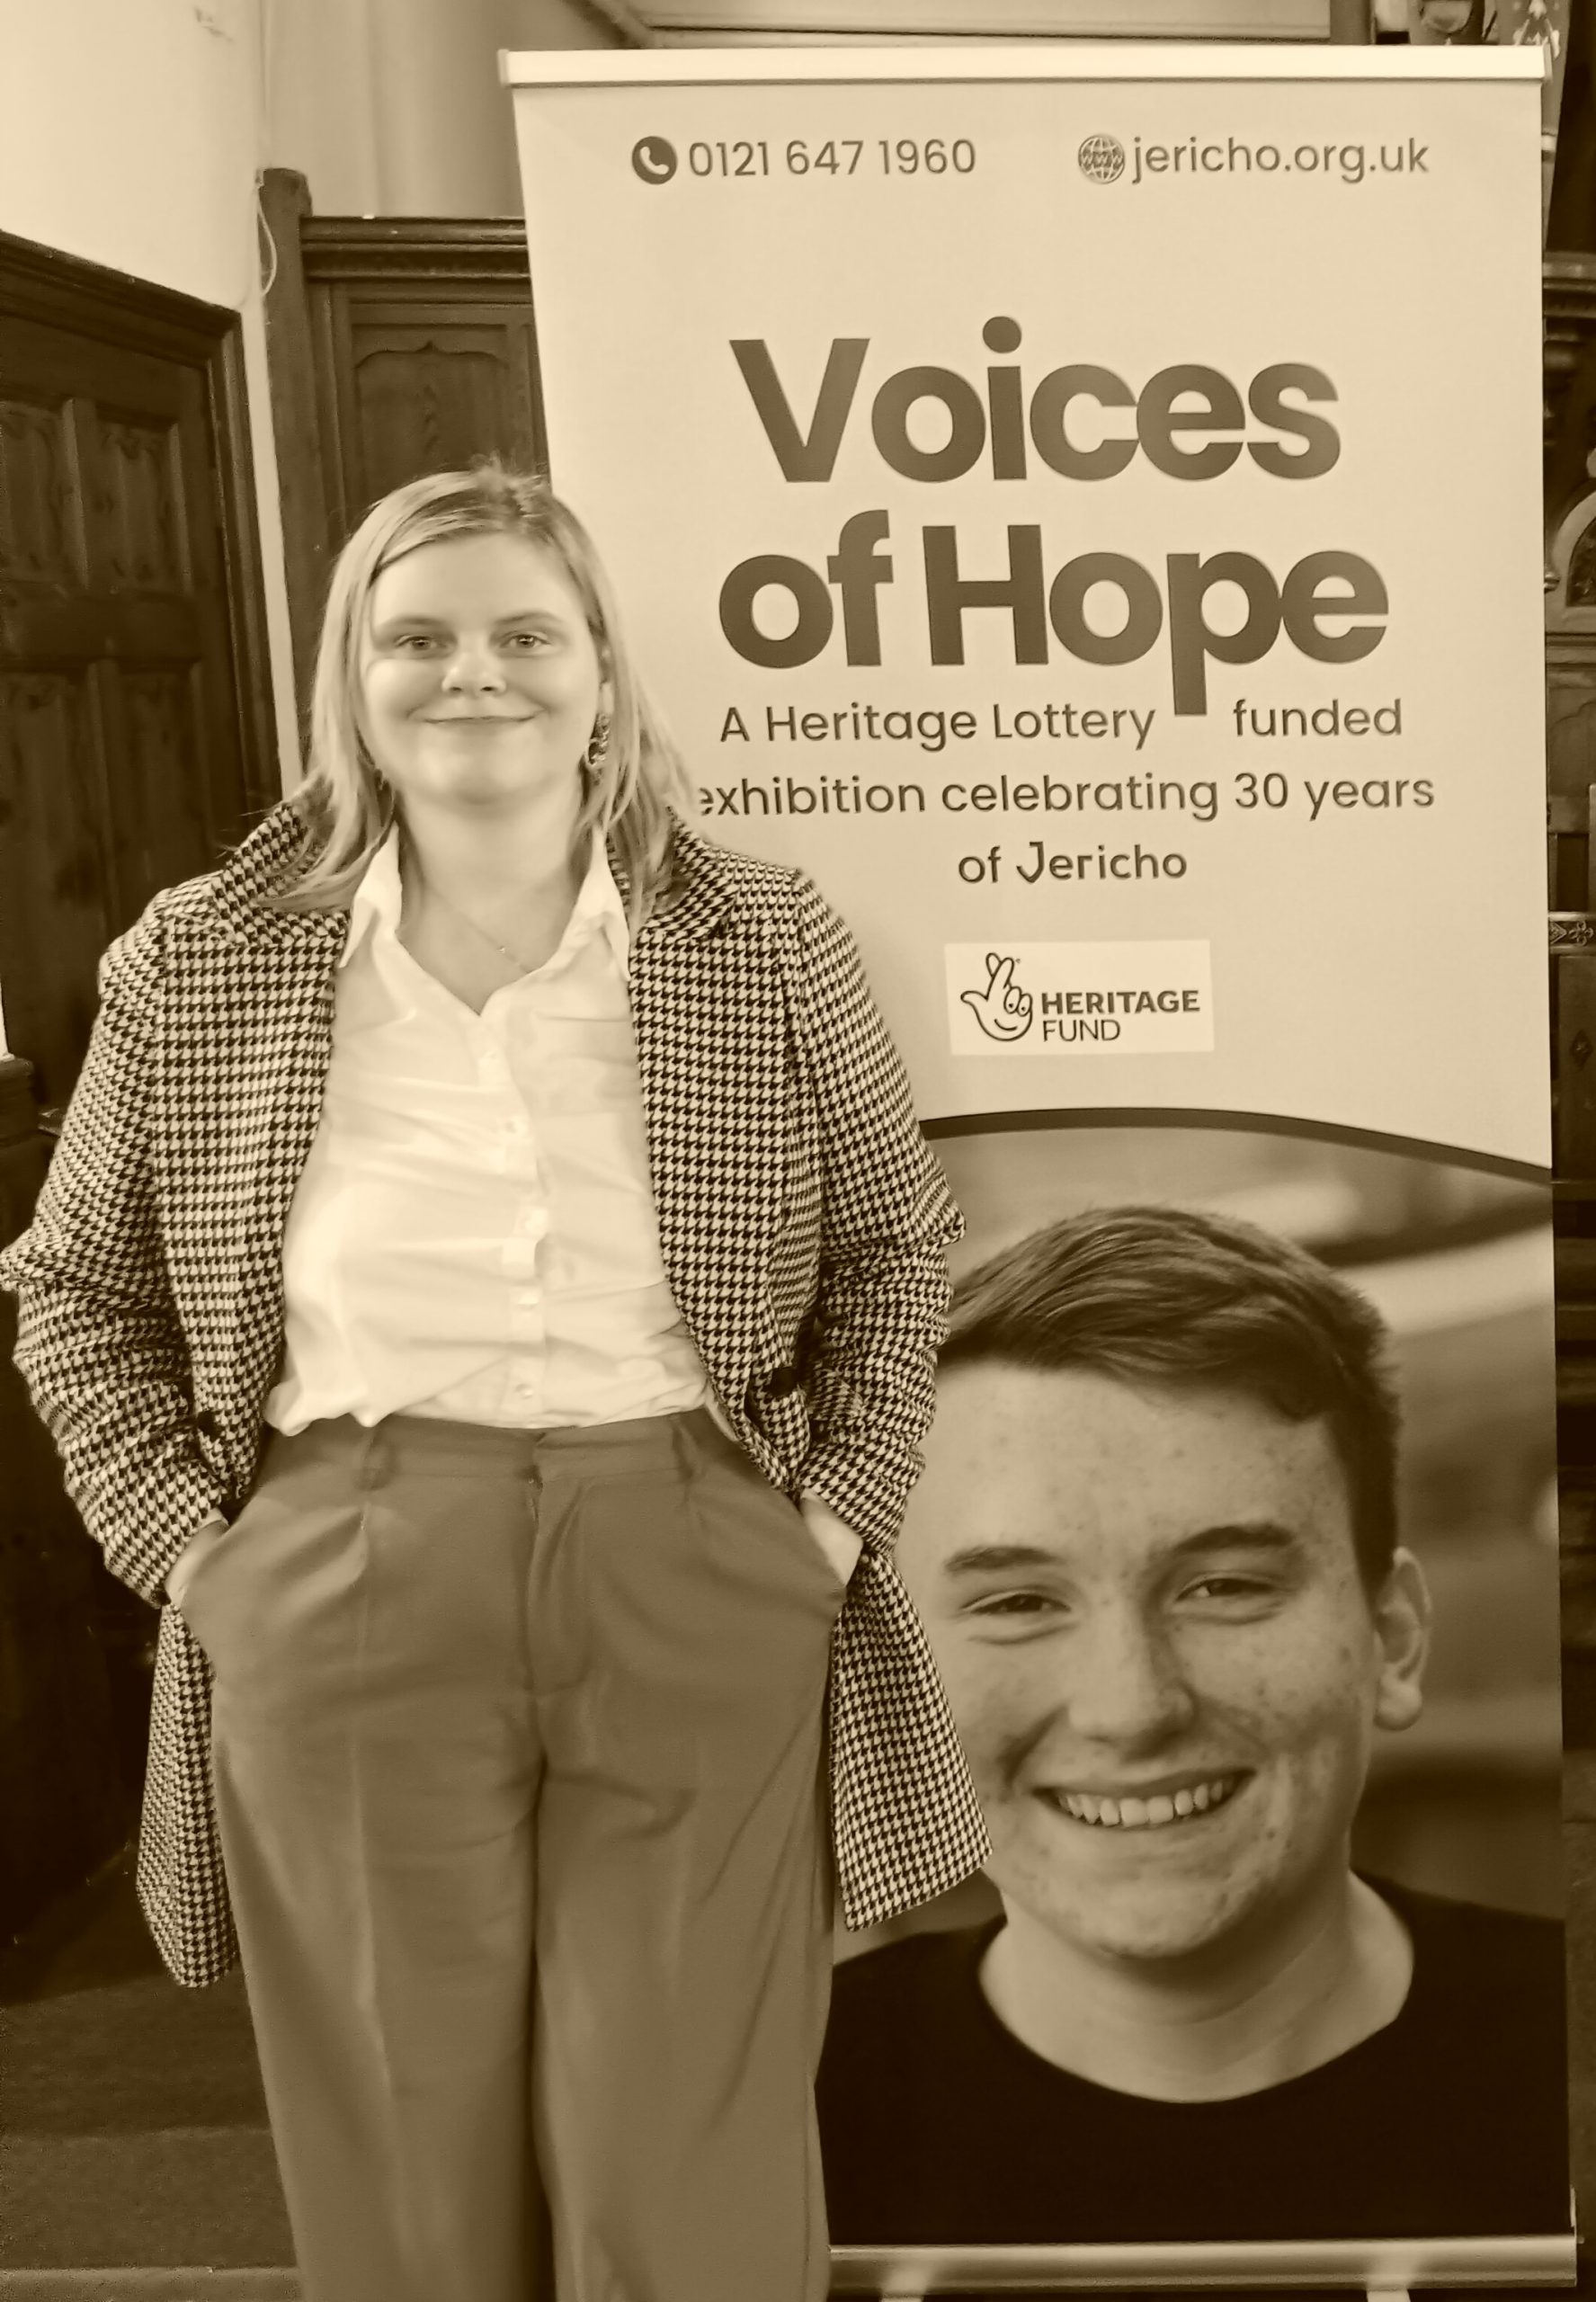 LJR standing next to a poster for Voices of Hope